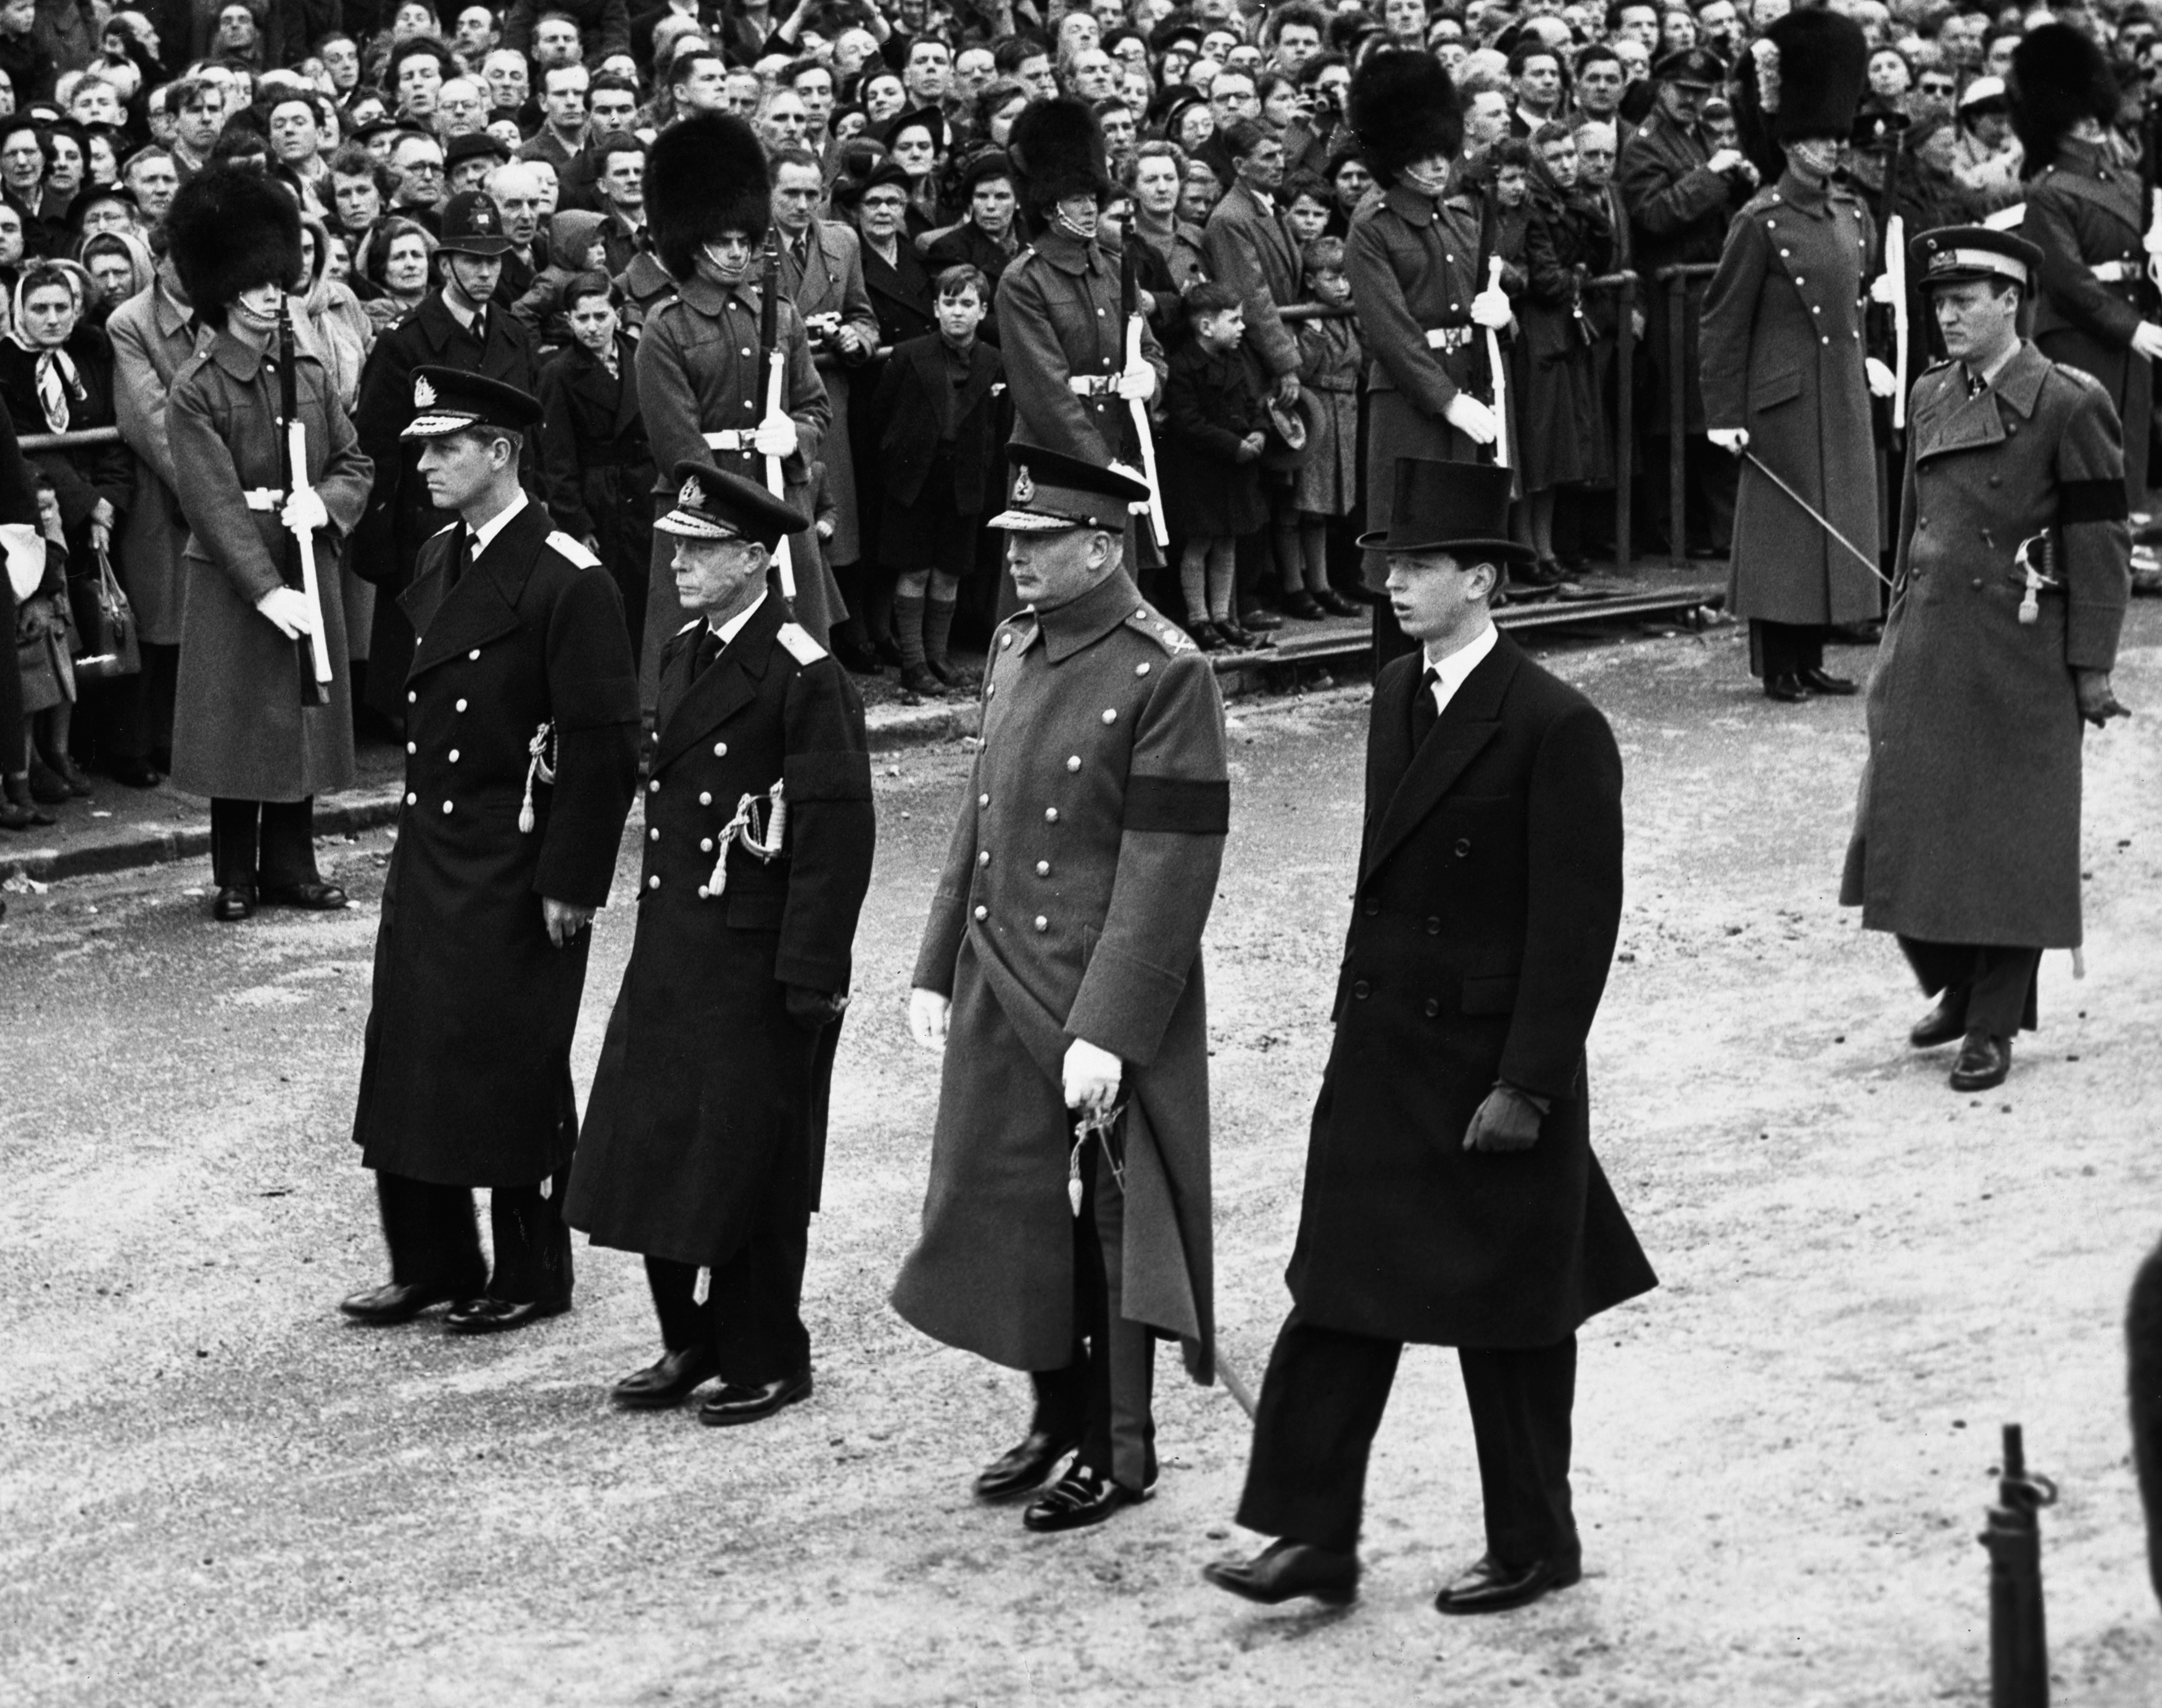 <p>Royal dukes followed the coffin of Queen Mary -- the widow of King George V and mother of King George VI, who'd died the previous year -- during her funeral procession through London from Marlborough House to Westminster Hall on March 31, 1953. </p><p>Shown are Prince Philip, Duke of Edinburgh (Queen Elizabeth II's husband); Edward, Duke of Windsor, and Henry, Duke of Gloucester (her sons); and Edward, Duke of Kent (her grandson). She passed away in her sleep at 85 that March 24.</p>